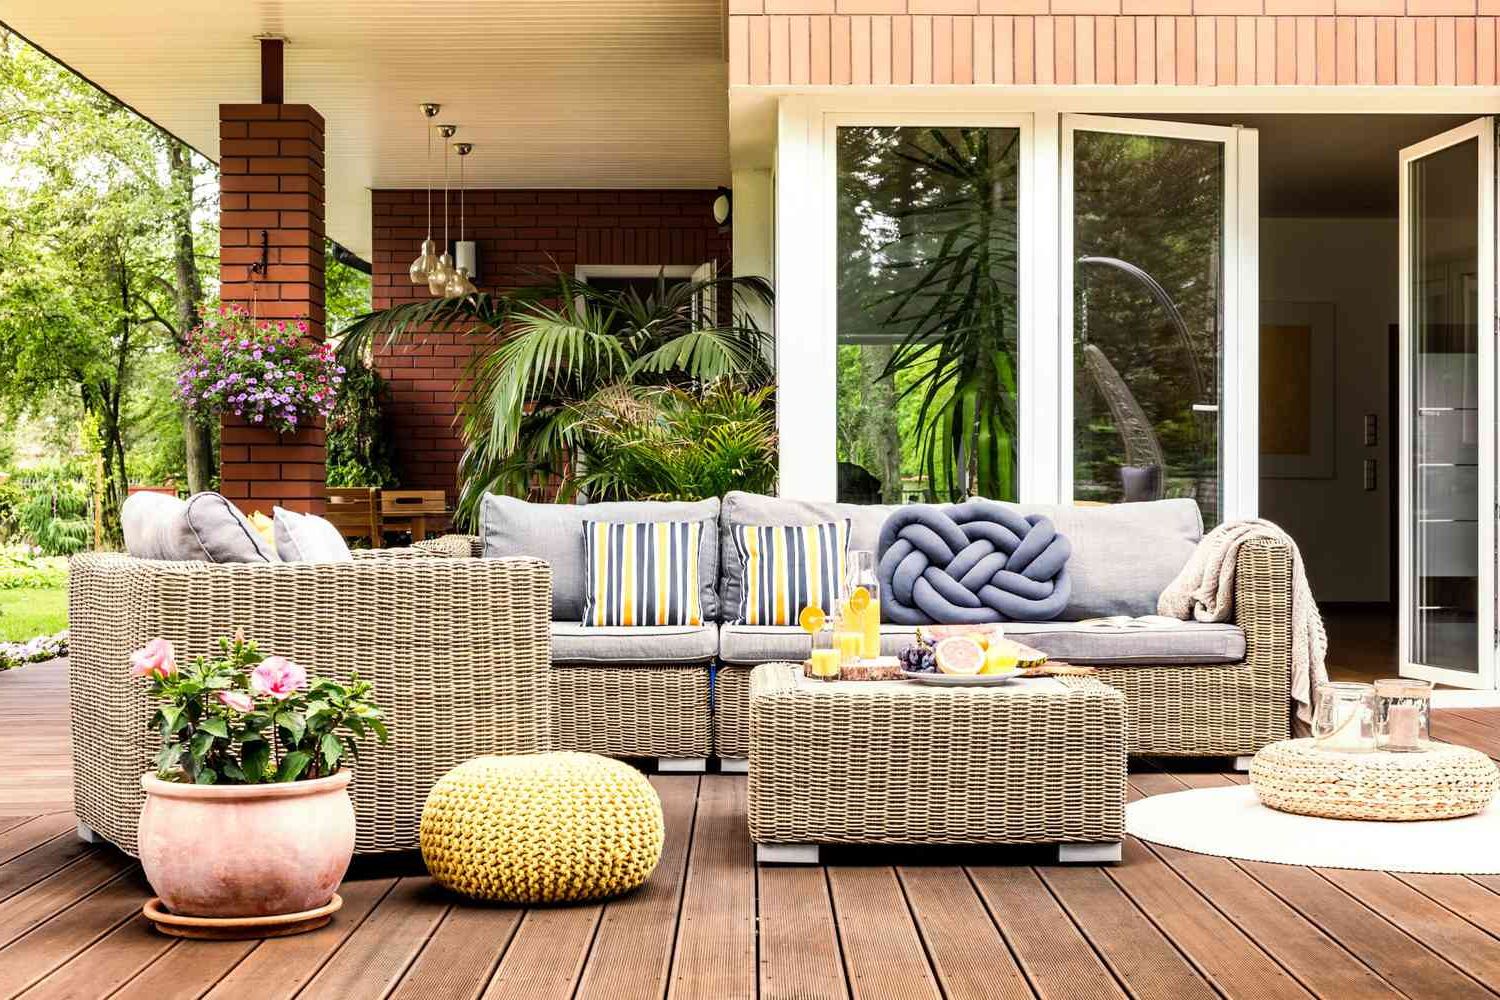 How To Clean And Care For Outdoor Furniture Regarding Famous Balcony Furniture Set With Beige Cushions (View 8 of 15)